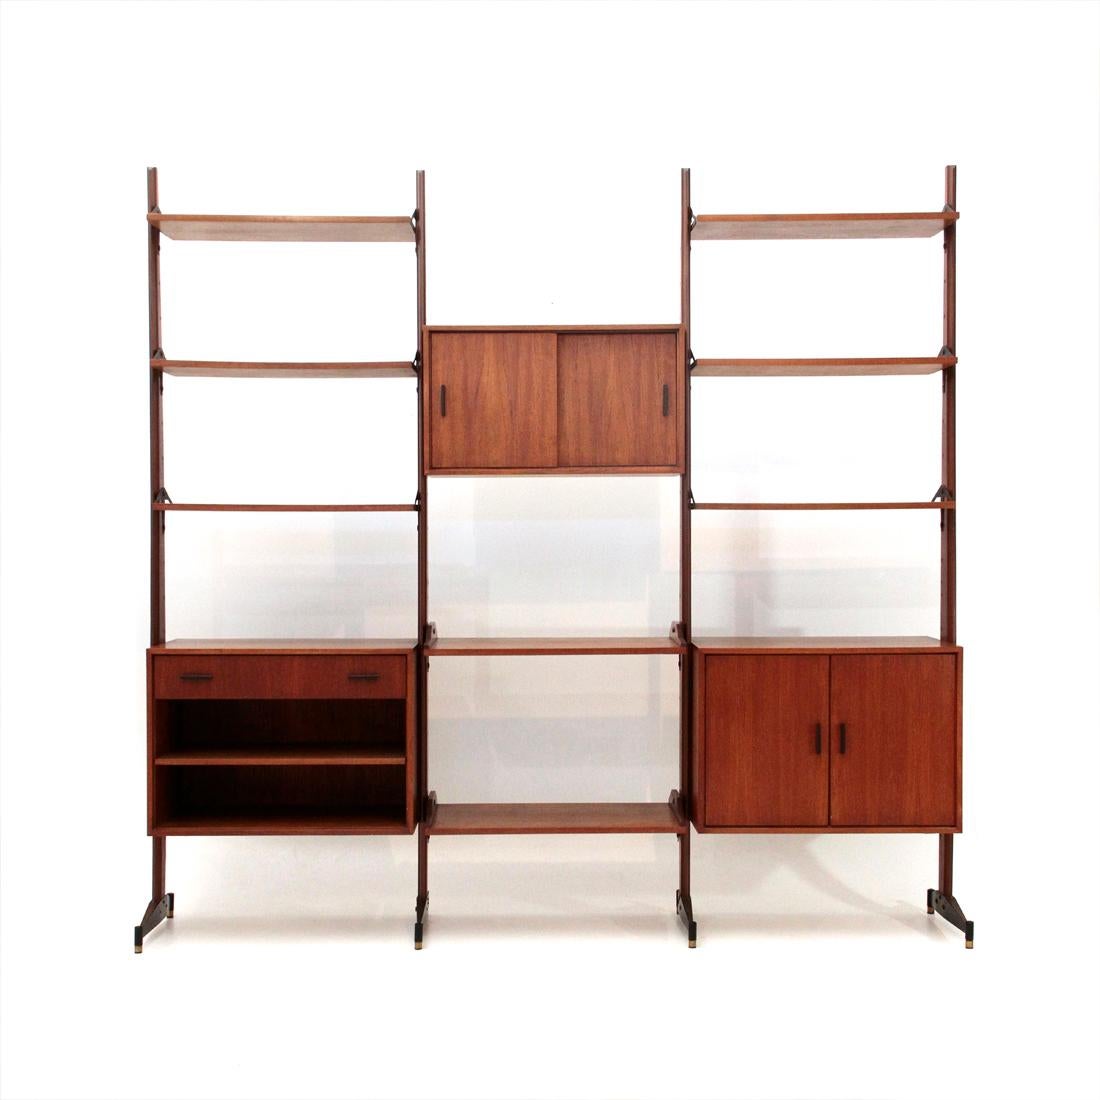 Italian manufacture bookshop produced in the 1960s.
Uprights in teak and black painted metal, height adjustable brass feet.
Containers in teak veneered wood and handles in black painted metal, internal shelves.
Shelves in teak veneered wood and